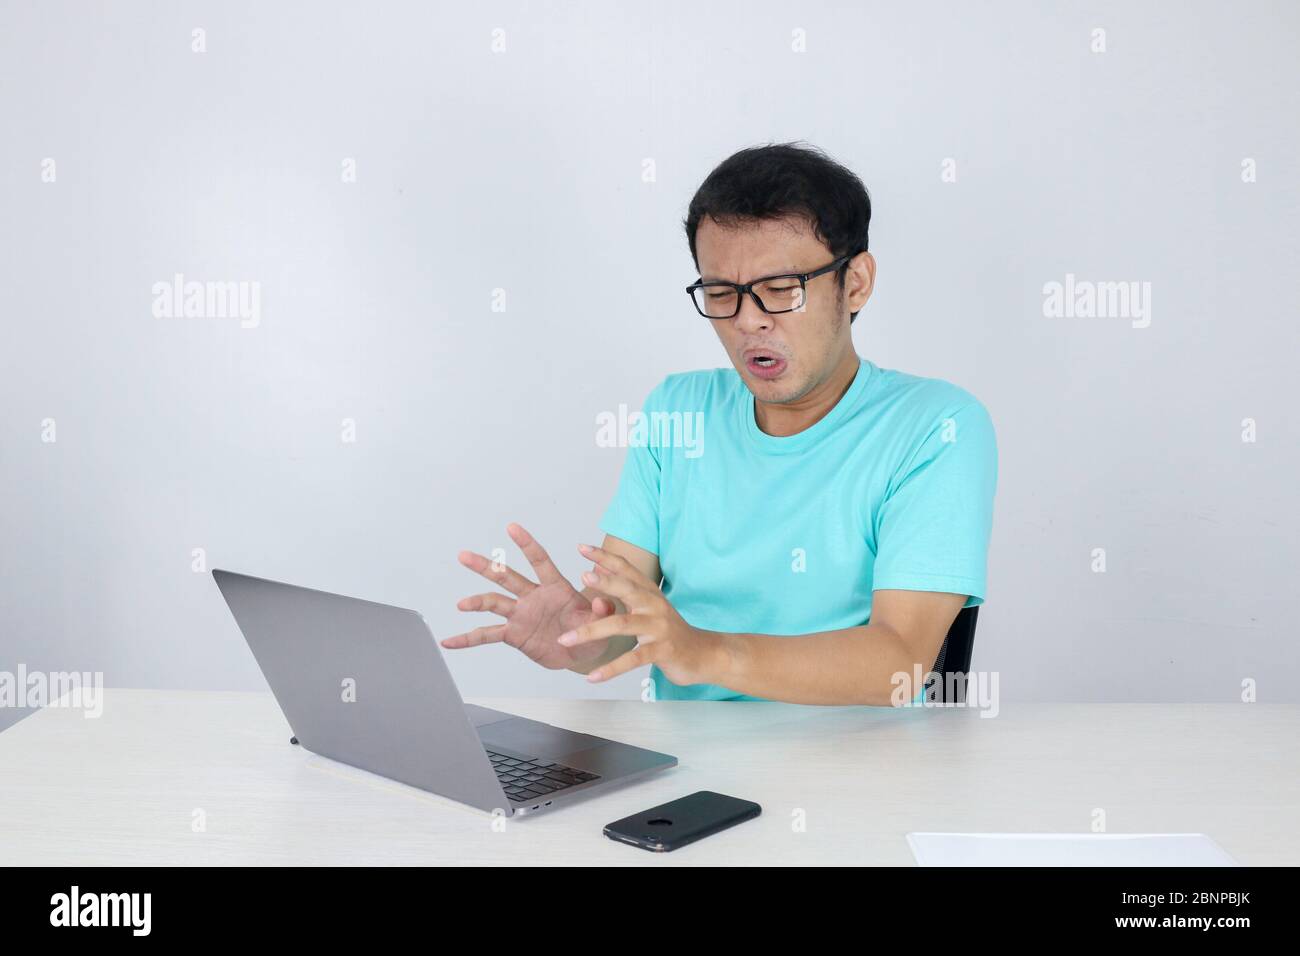 Young Asian man is Angry and Shock with laptop. Indonesian man wearing blue shirt. Stock Photo